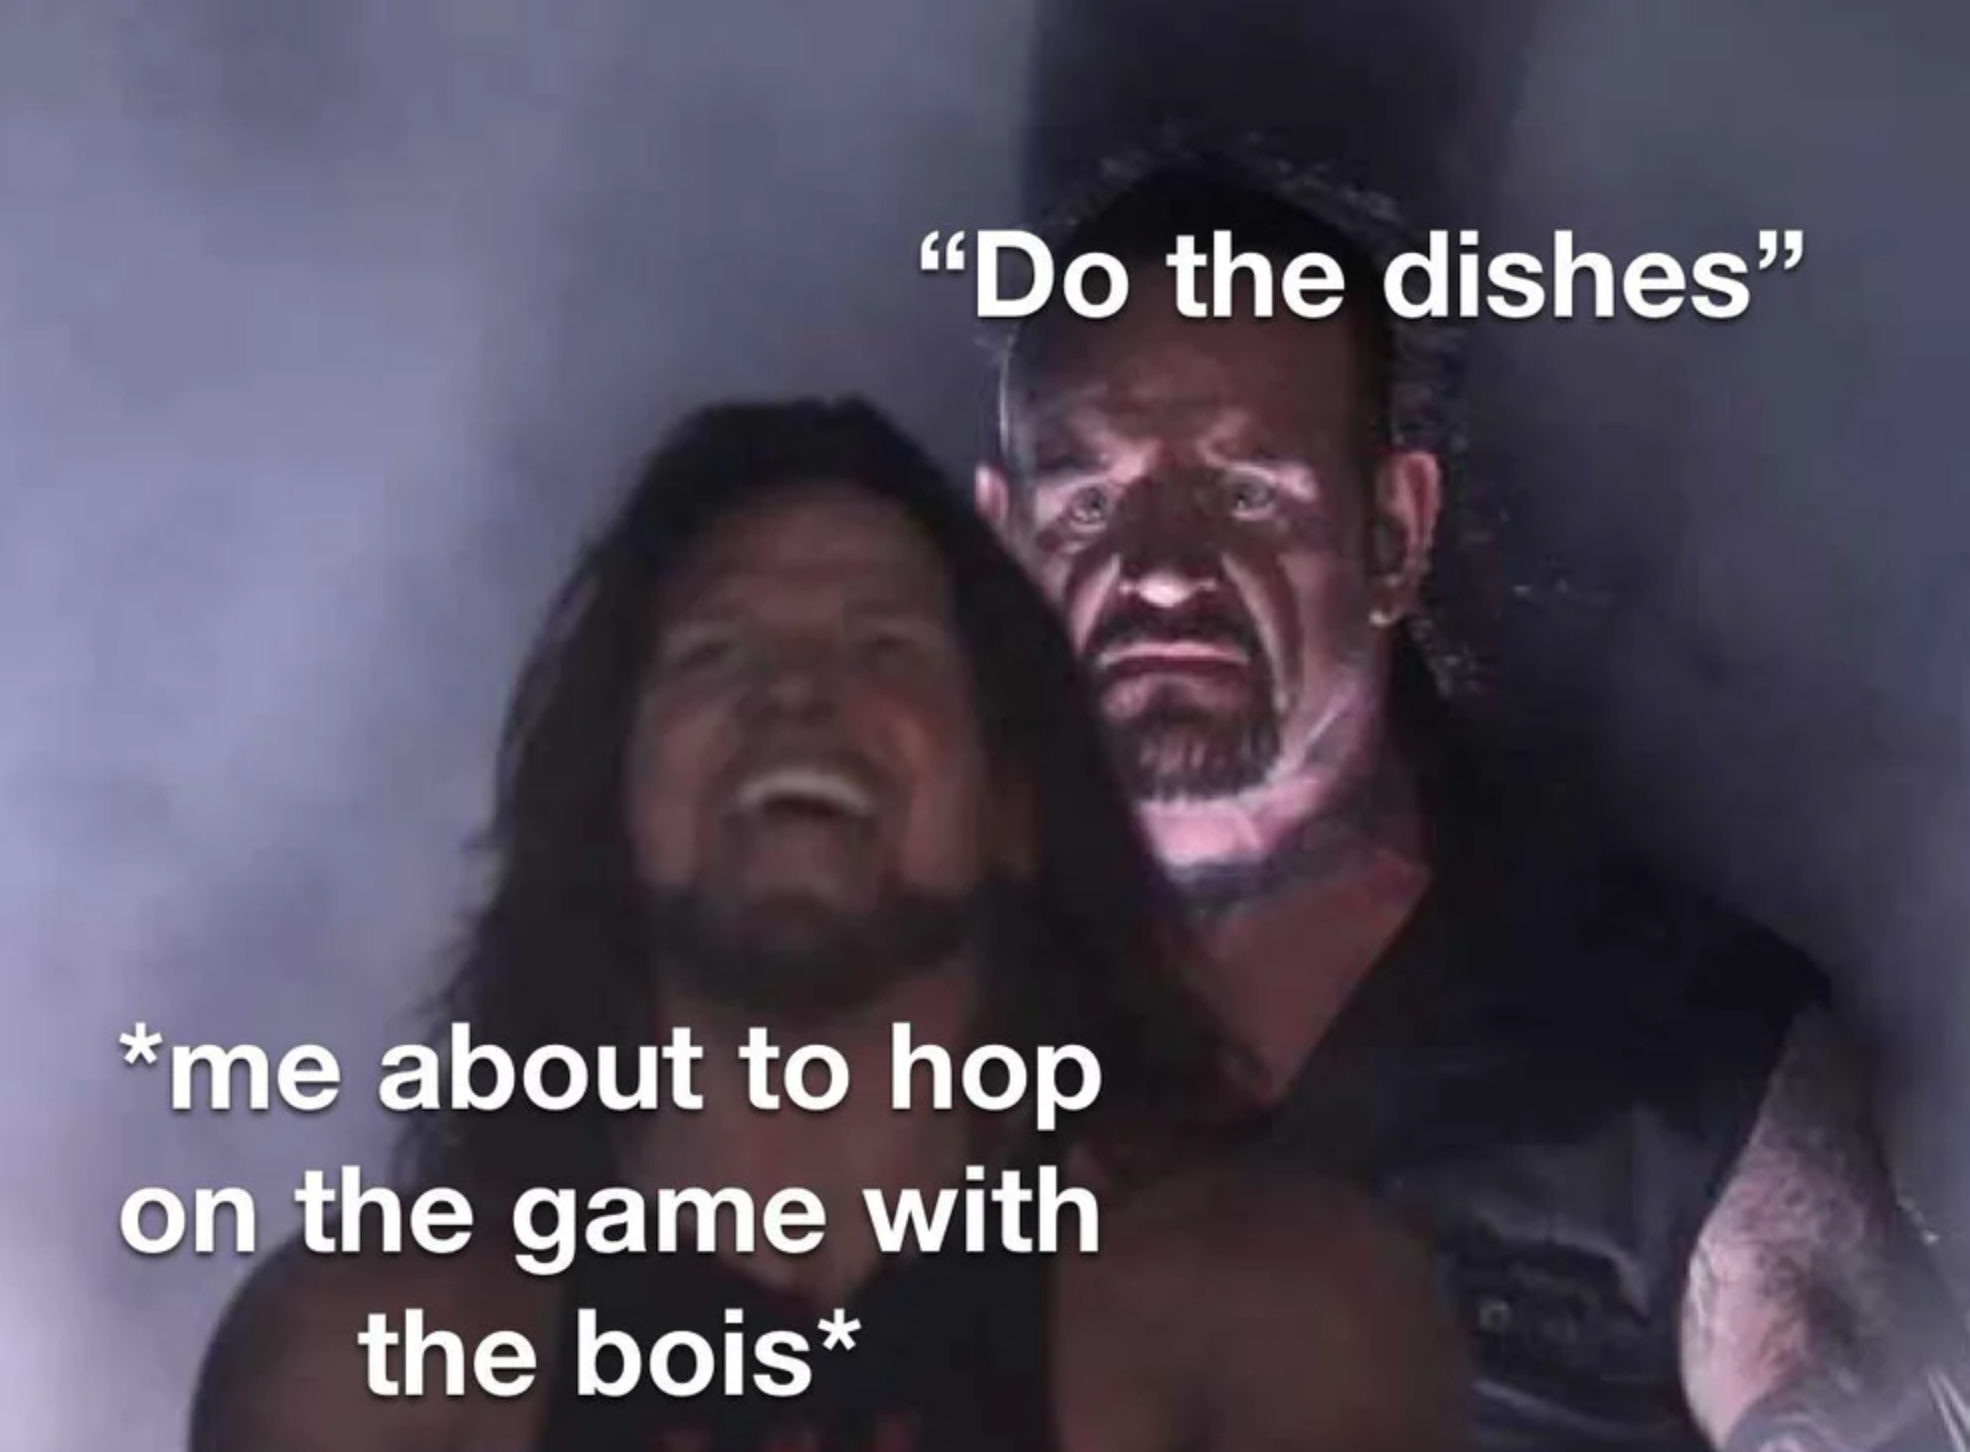 funny gaming memes  - among us meme fall guys - "Do the dishes." me about to hop on the game with the bois